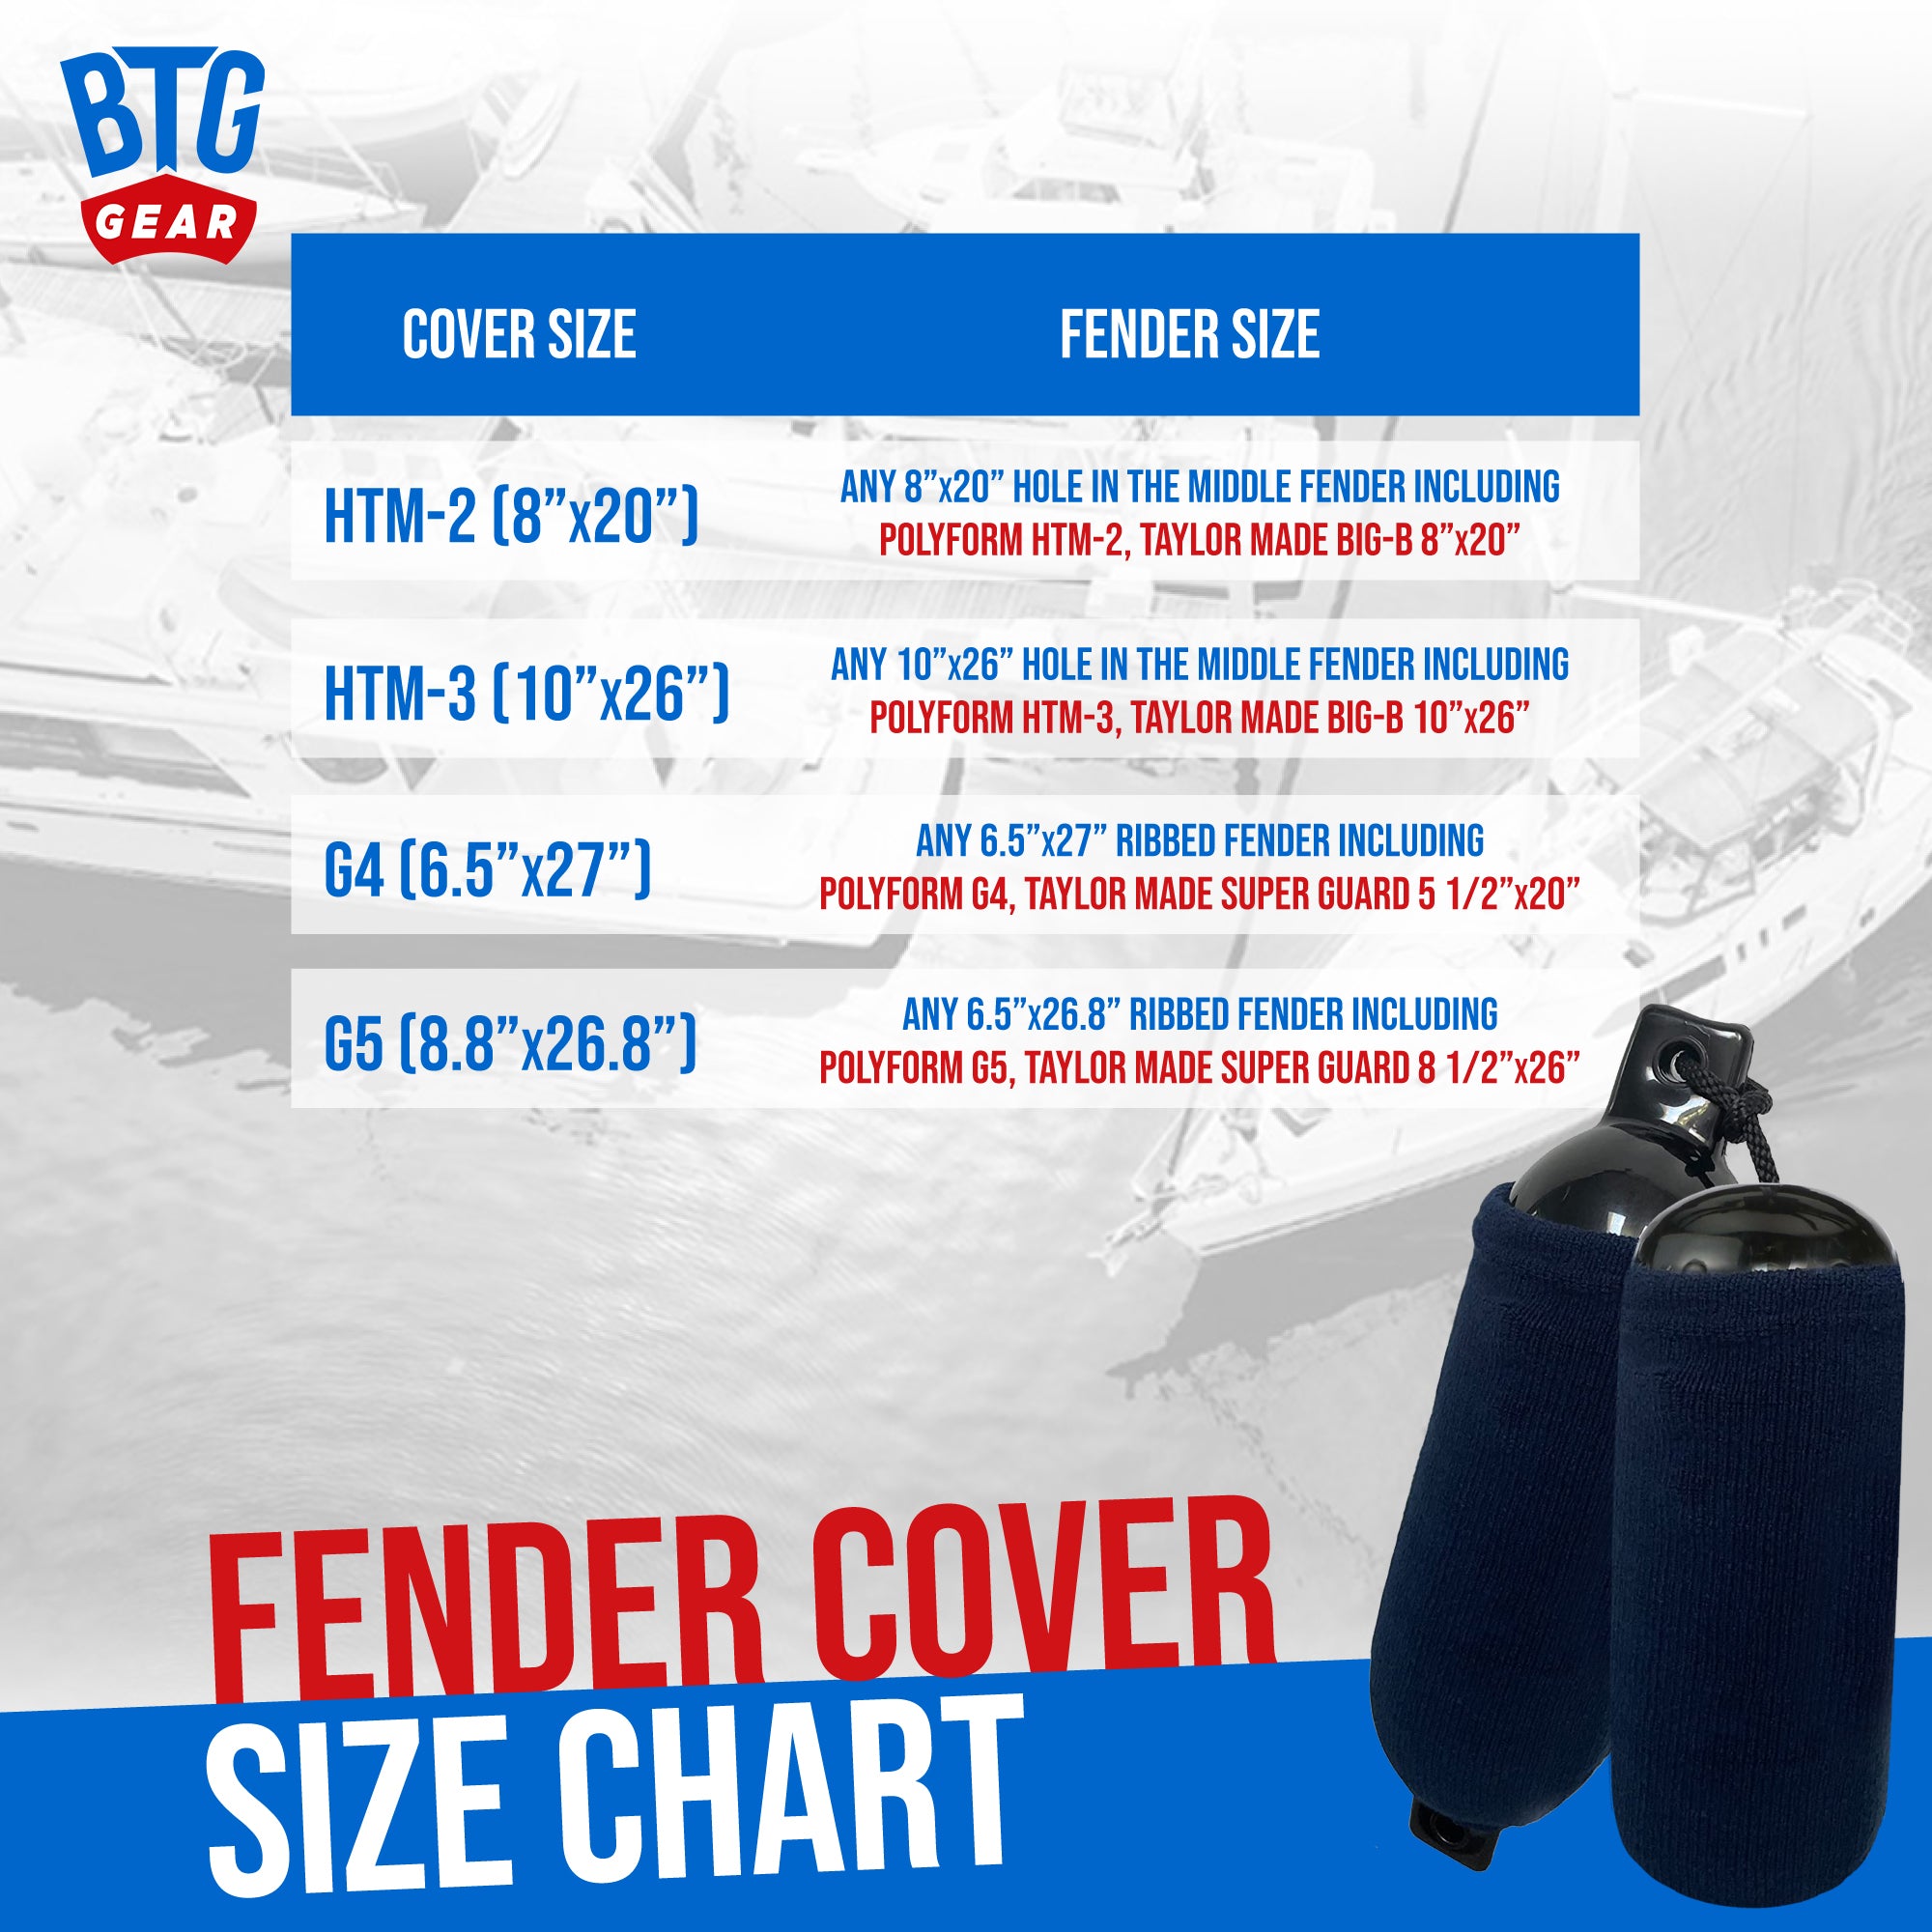 BTG Gear G4/G5 Marine-Grade Fleece Boat Fender Bumper Covers, Pair/Set of 2 in Navy Blue- for Double Eye Ribbed Fenders, Stretchable up to 20 to 30 inches Long